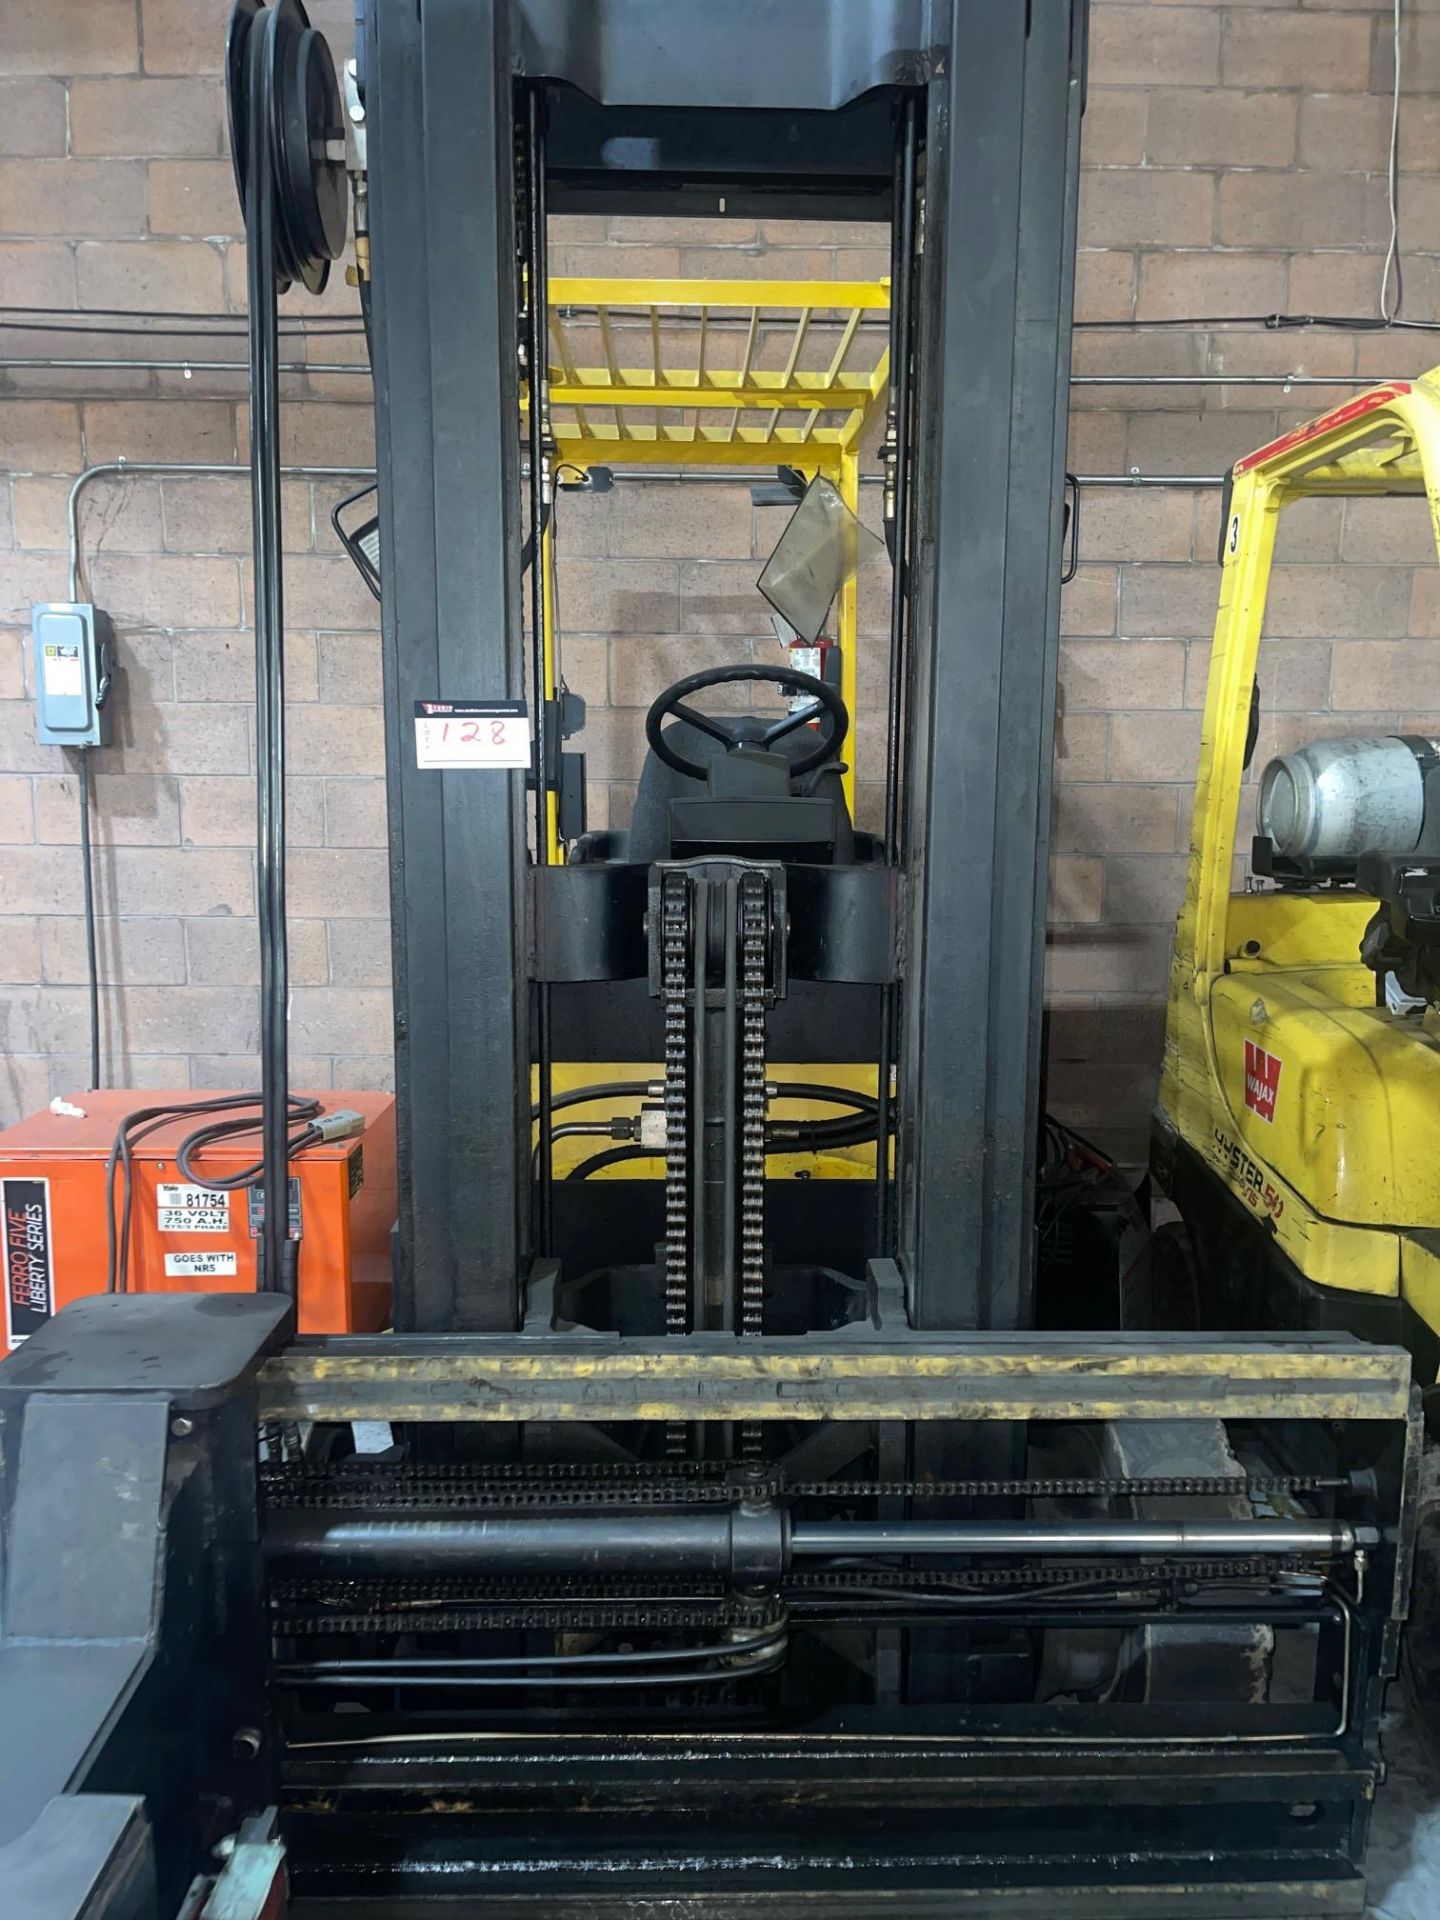 HYSTER ELECTRIC FORKLIFT WITH RUBBER TYRE, MODEL # N30XMH, SERIAL # C210V01599V, CAPACITY 3000 LBS - Image 5 of 5